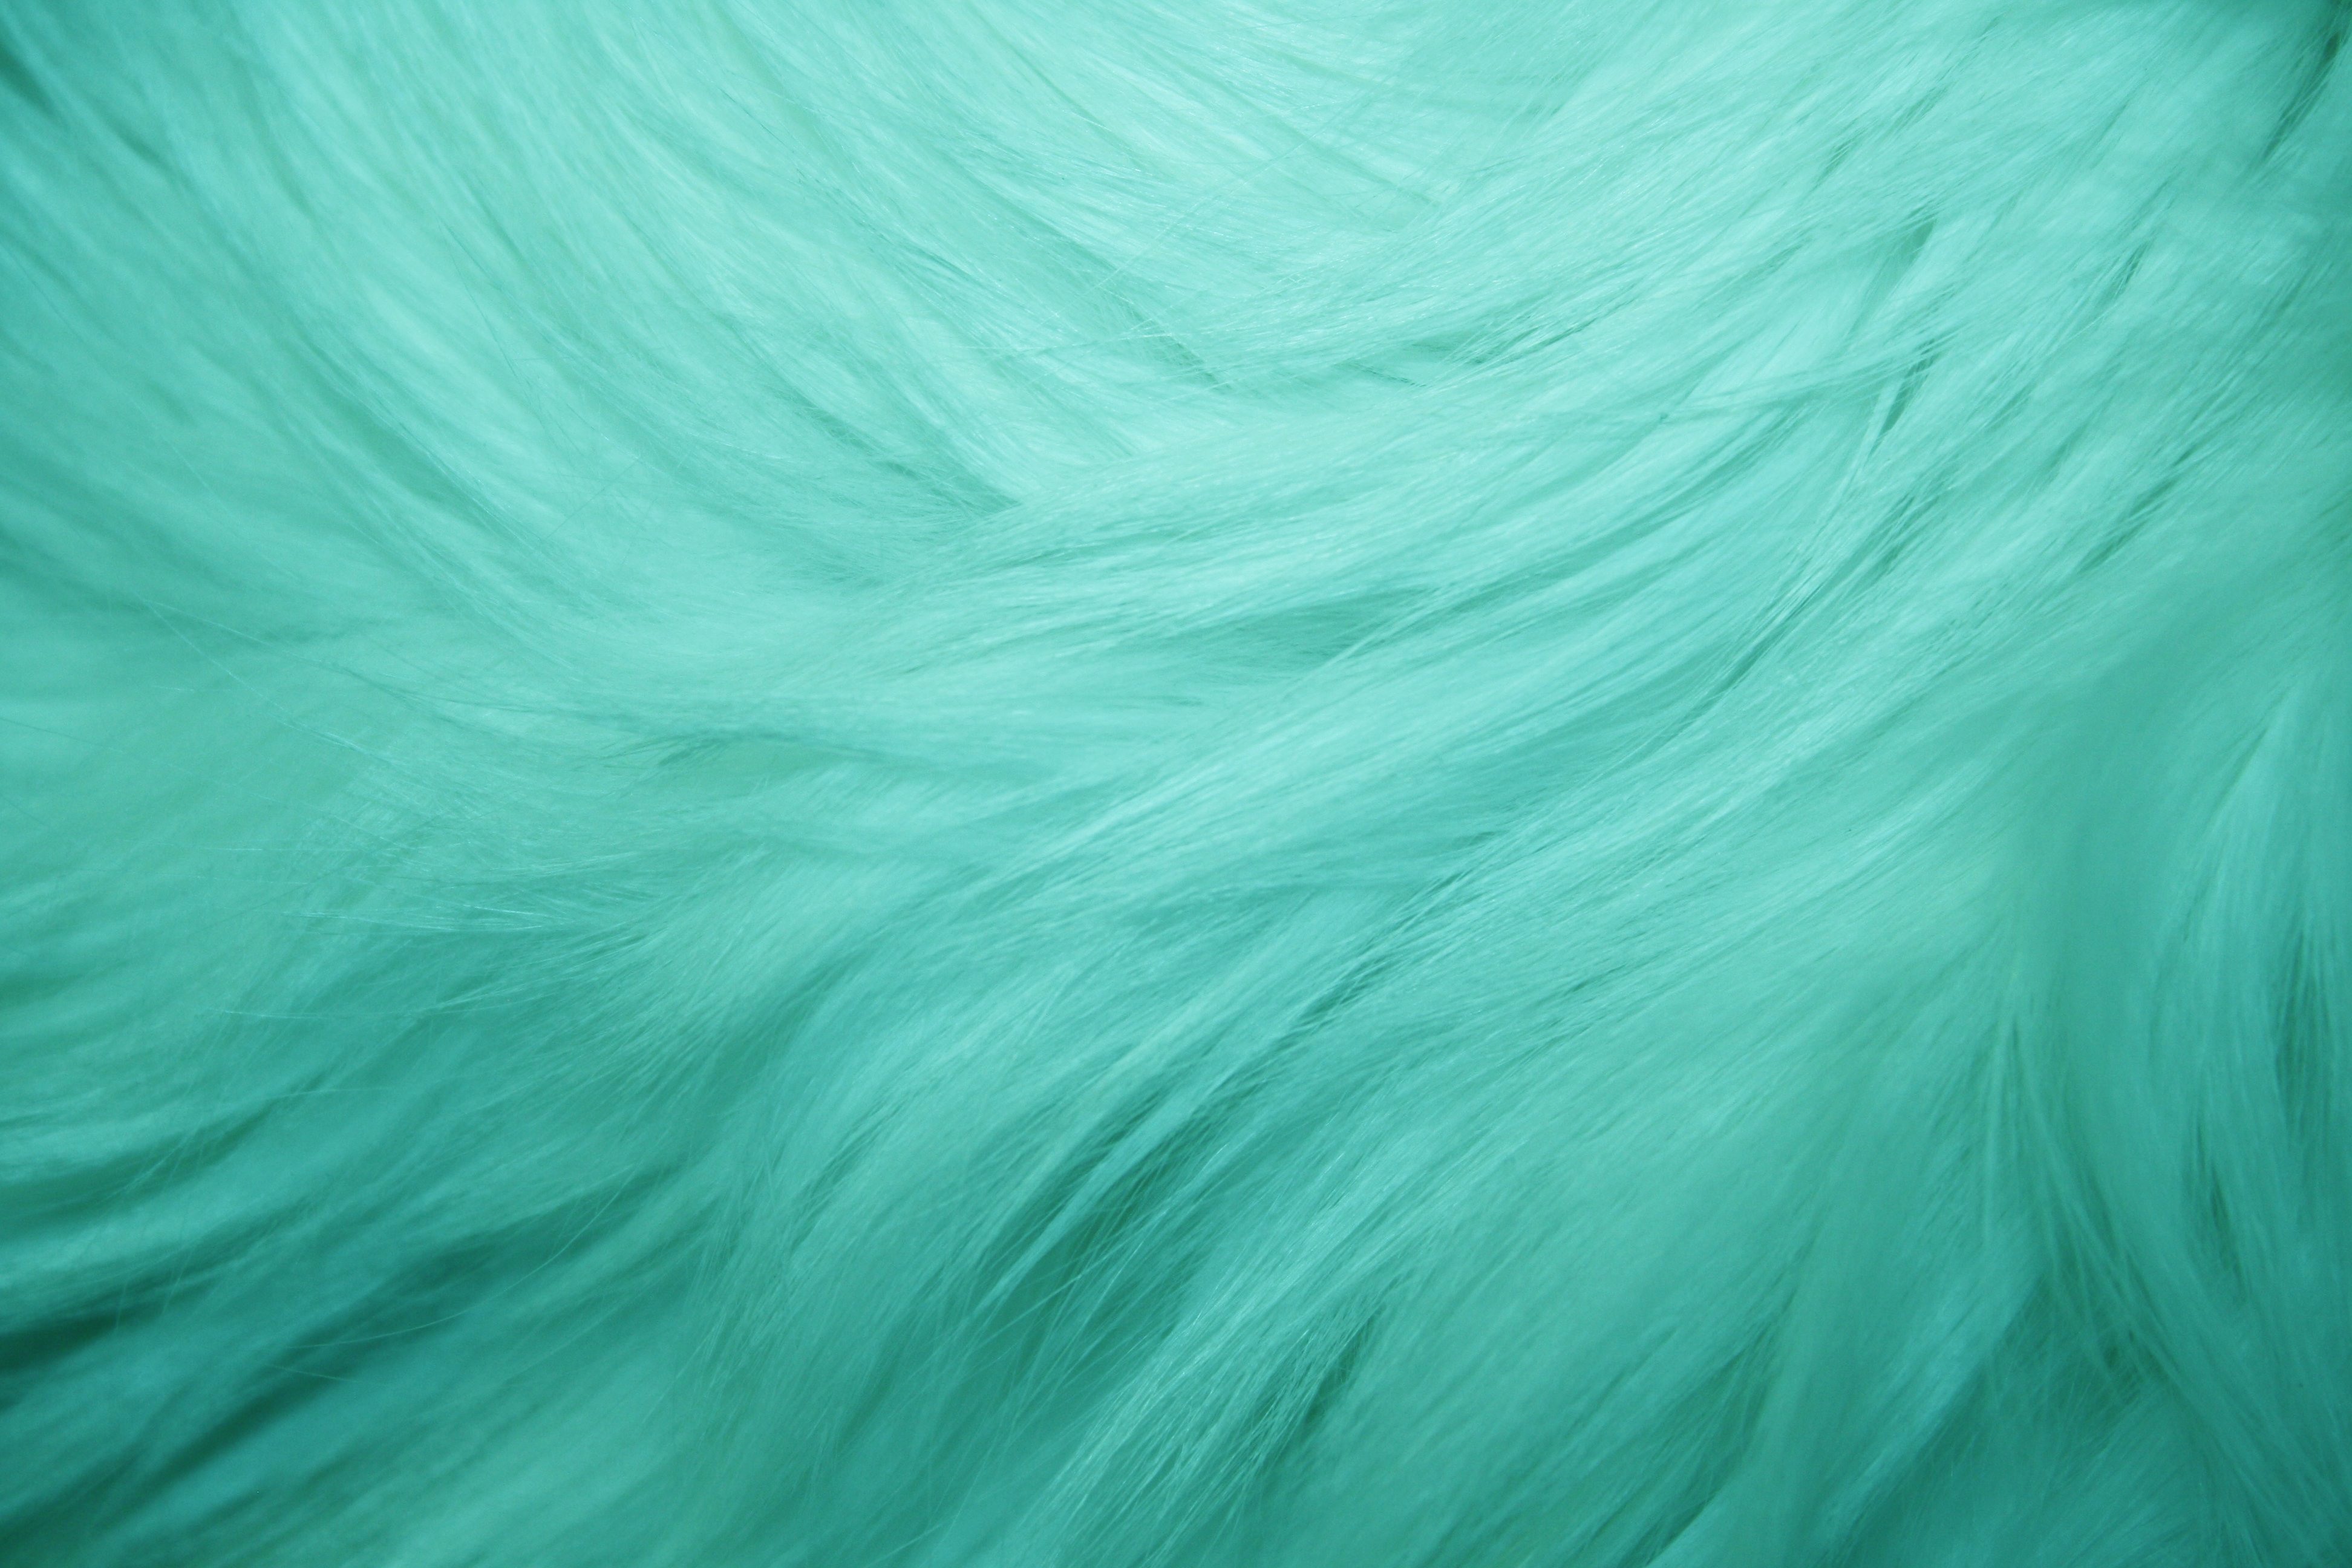 Teal Fur Texture   Free High Resolution Photo   Dimensions 3888